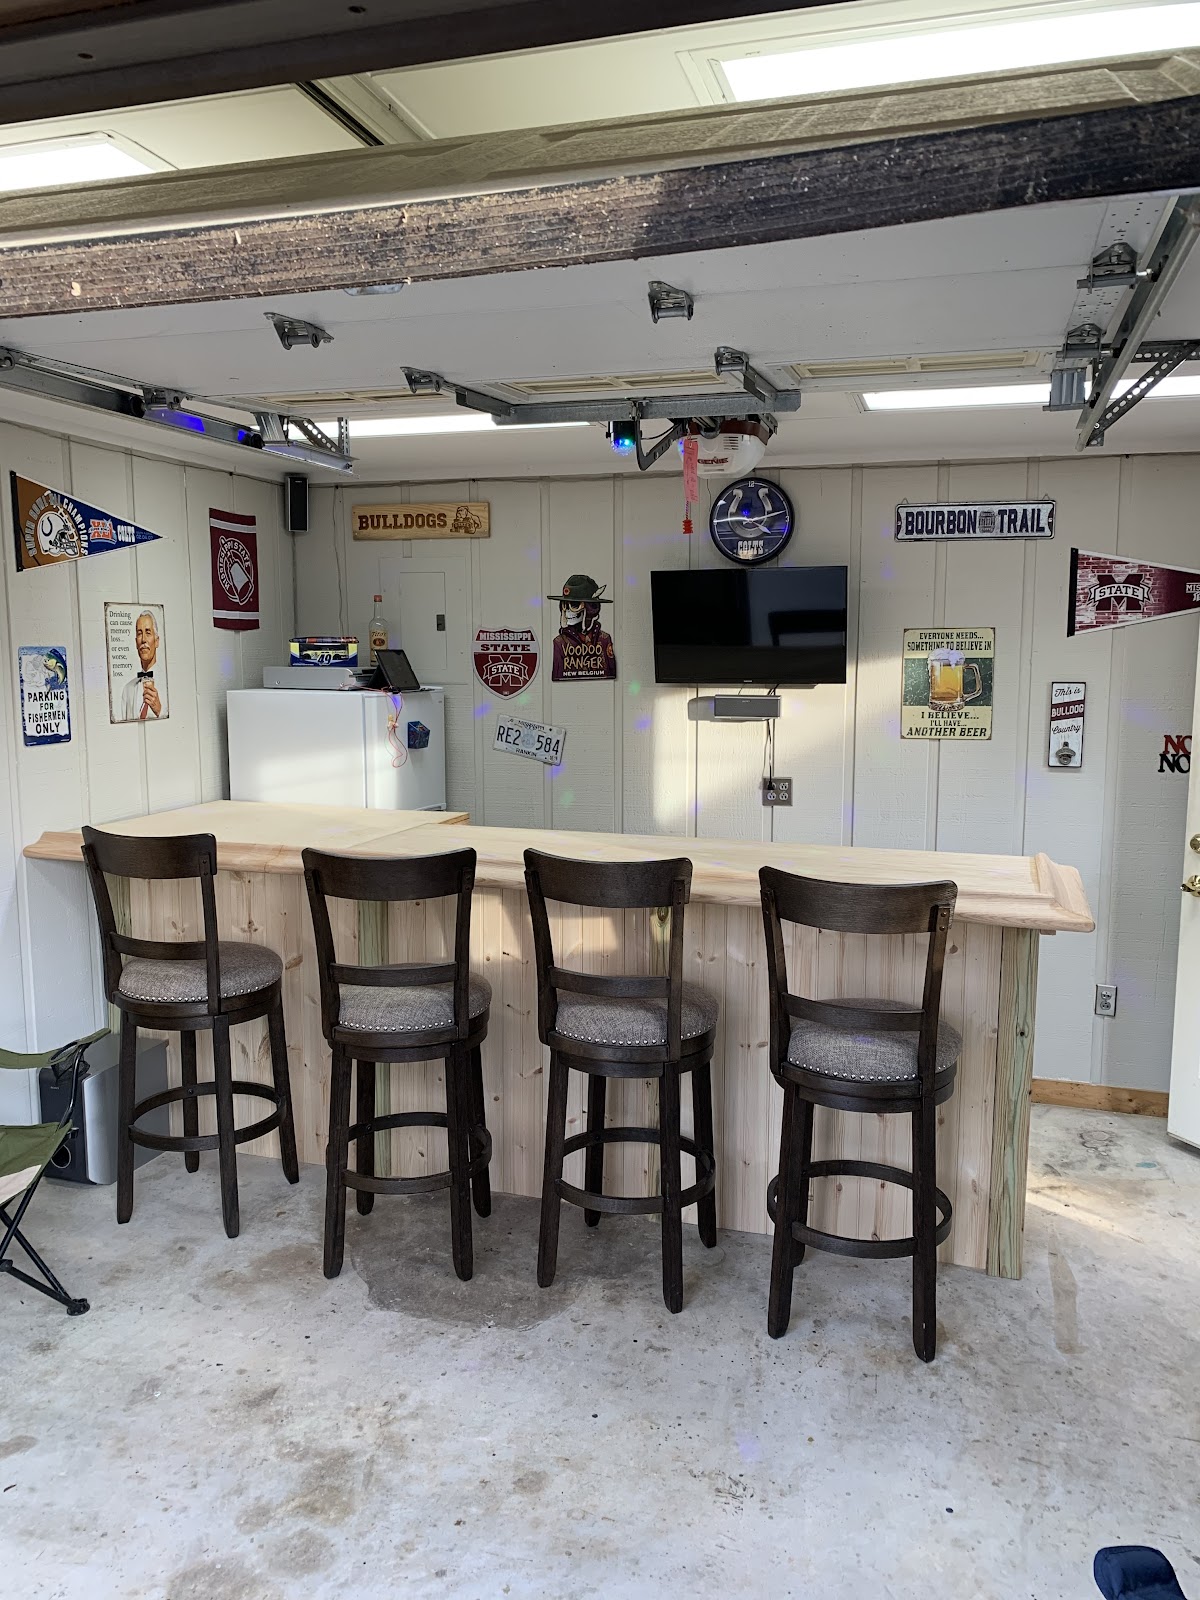 5 Easy Steps For Planning Your Home Bar